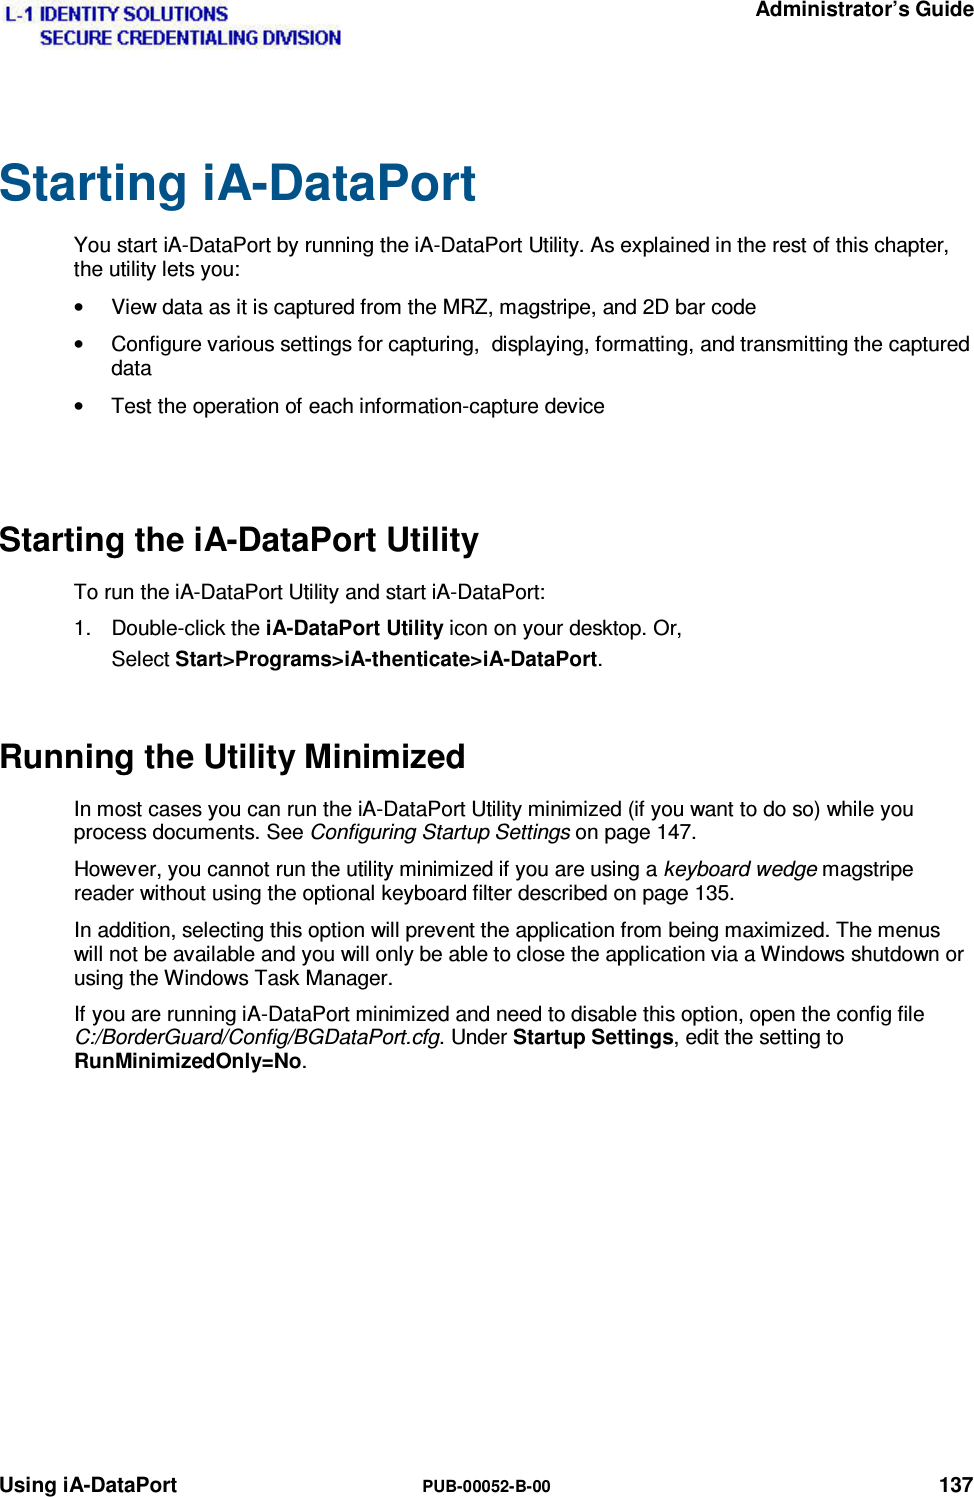   Administrator’s Guide Using iA-DataPort  PUB-00052-B-00 137 Starting iA-DataPort You start iA-DataPort by running the iA-DataPort Utility. As explained in the rest of this chapter, the utility lets you: •  View data as it is captured from the MRZ, magstripe, and 2D bar code •  Configure various settings for capturing,  displaying, formatting, and transmitting the captured data •  Test the operation of each information-capture device  Starting the iA-DataPort Utility To run the iA-DataPort Utility and start iA-DataPort: 1. Double-click the iA-DataPort Utility icon on your desktop. Or, Select Start&gt;Programs&gt;iA-thenticate&gt;iA-DataPort. Running the Utility Minimized In most cases you can run the iA-DataPort Utility minimized (if you want to do so) while you process documents. See Configuring Startup Settings on page 147. However, you cannot run the utility minimized if you are using a keyboard wedge magstripe reader without using the optional keyboard filter described on page 135. In addition, selecting this option will prevent the application from being maximized. The menus will not be available and you will only be able to close the application via a Windows shutdown or using the Windows Task Manager. If you are running iA-DataPort minimized and need to disable this option, open the config file C:/BorderGuard/Config/BGDataPort.cfg. Under Startup Settings, edit the setting to RunMinimizedOnly=No.        